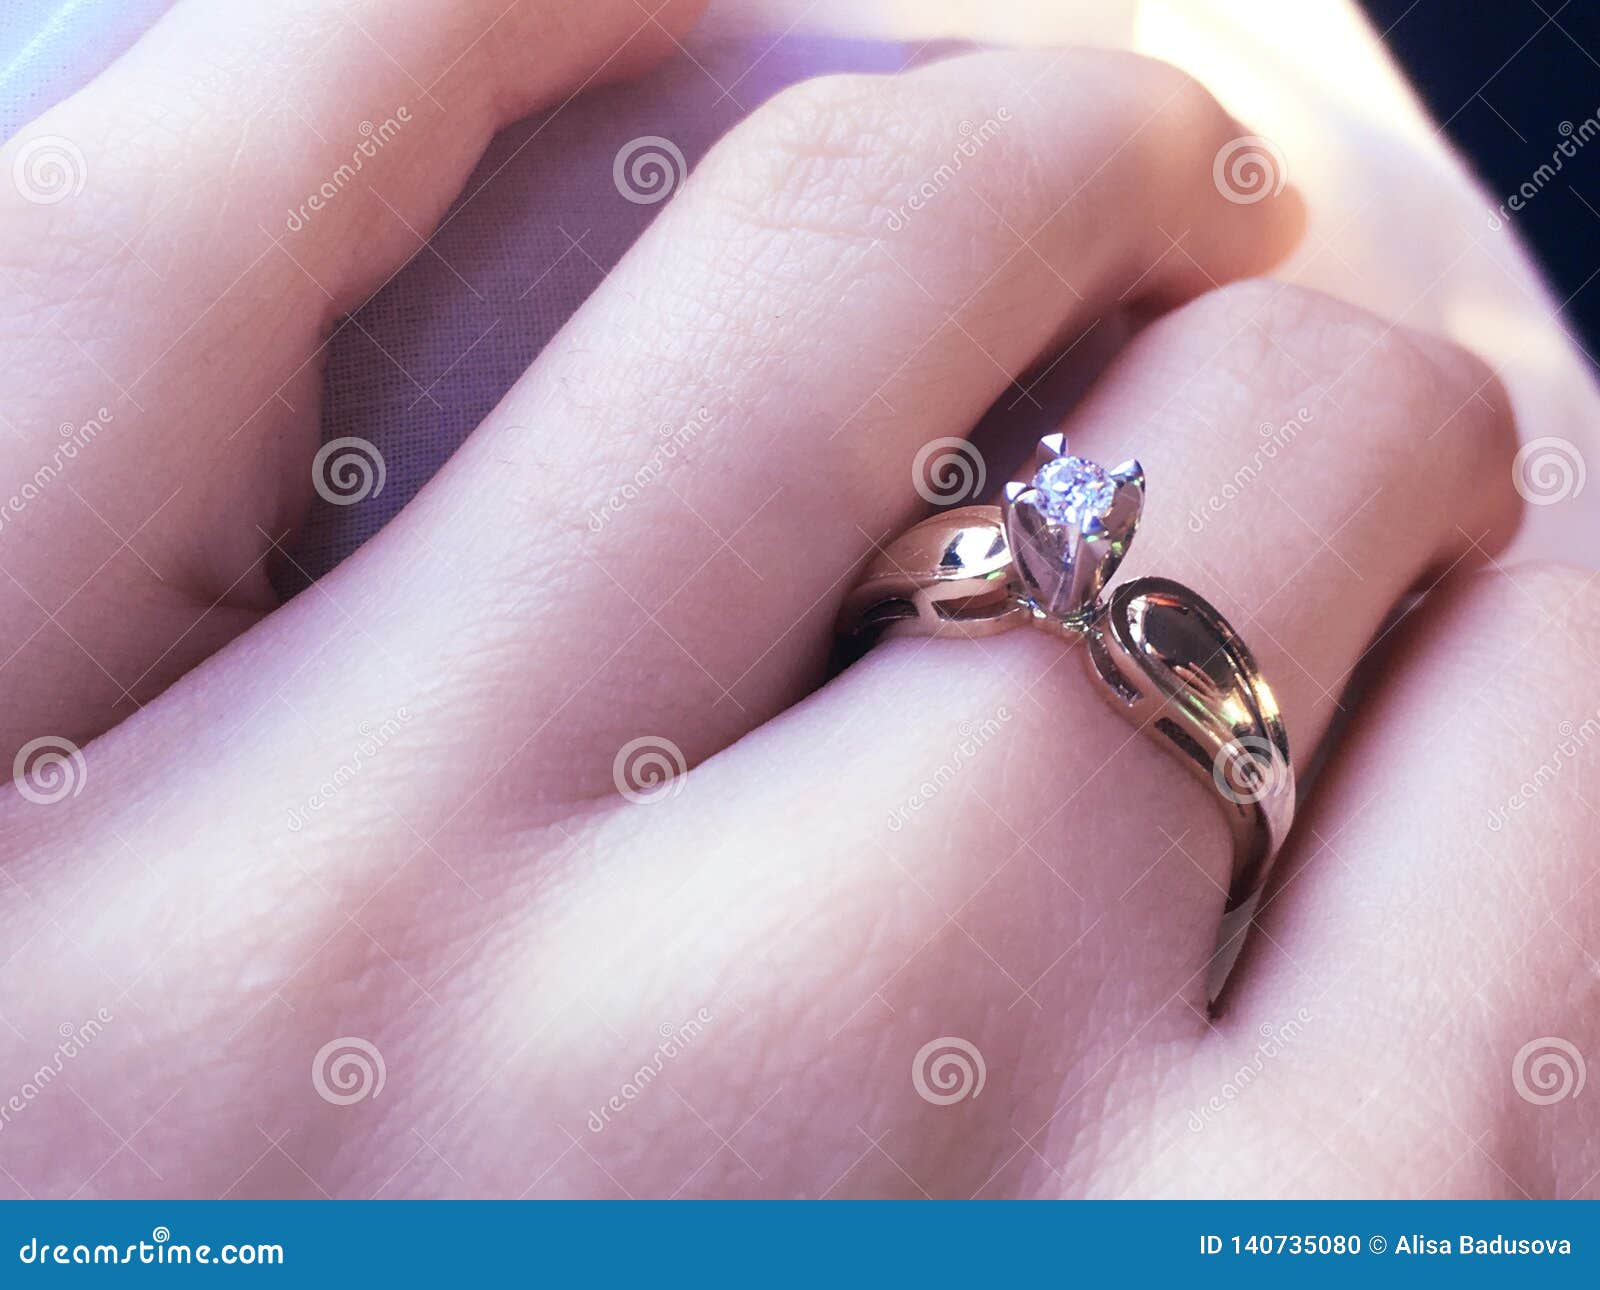 Woman Wore Fake Engagement Ring for a Week, Not Ready to Get Married-gemektower.com.vn